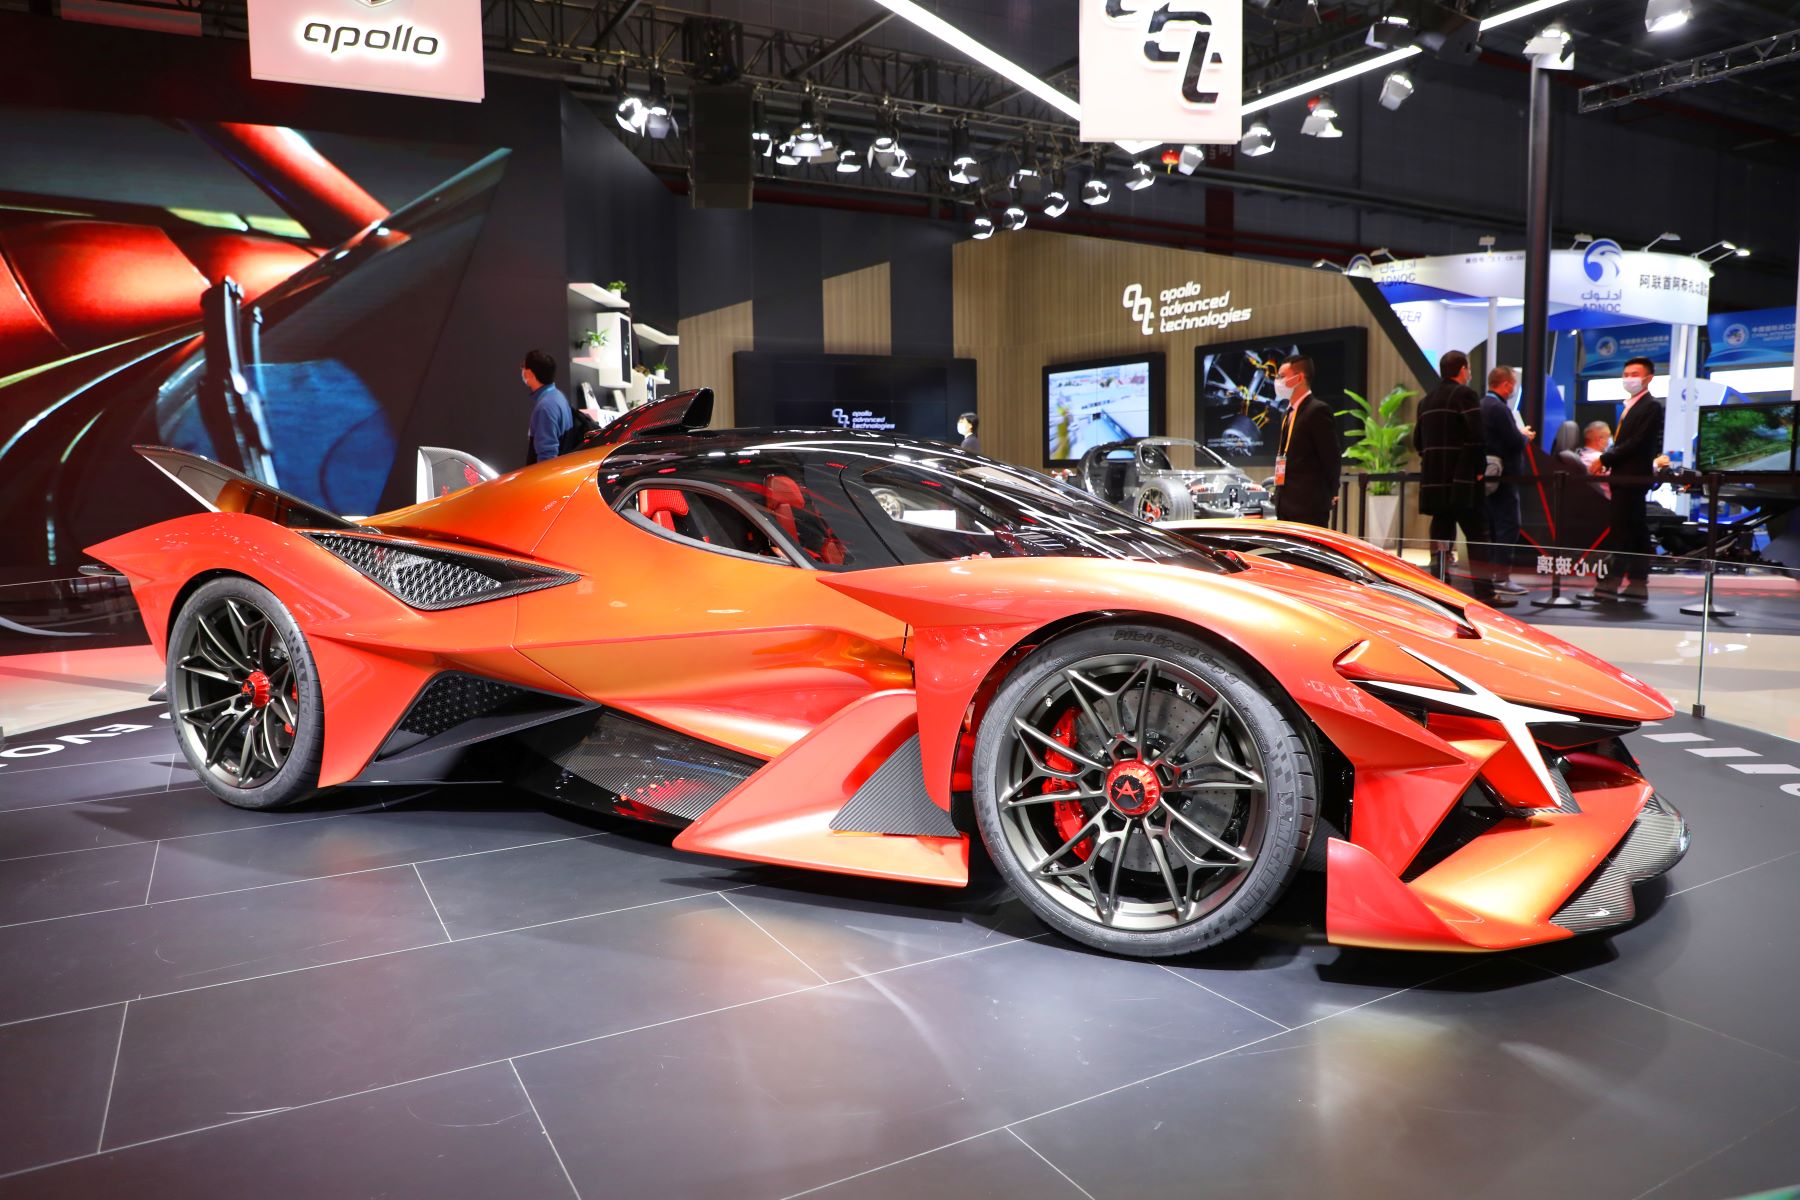 The Apollo EVO supercar hypercar on display at the 2021 China International Import Expo in Shanghai